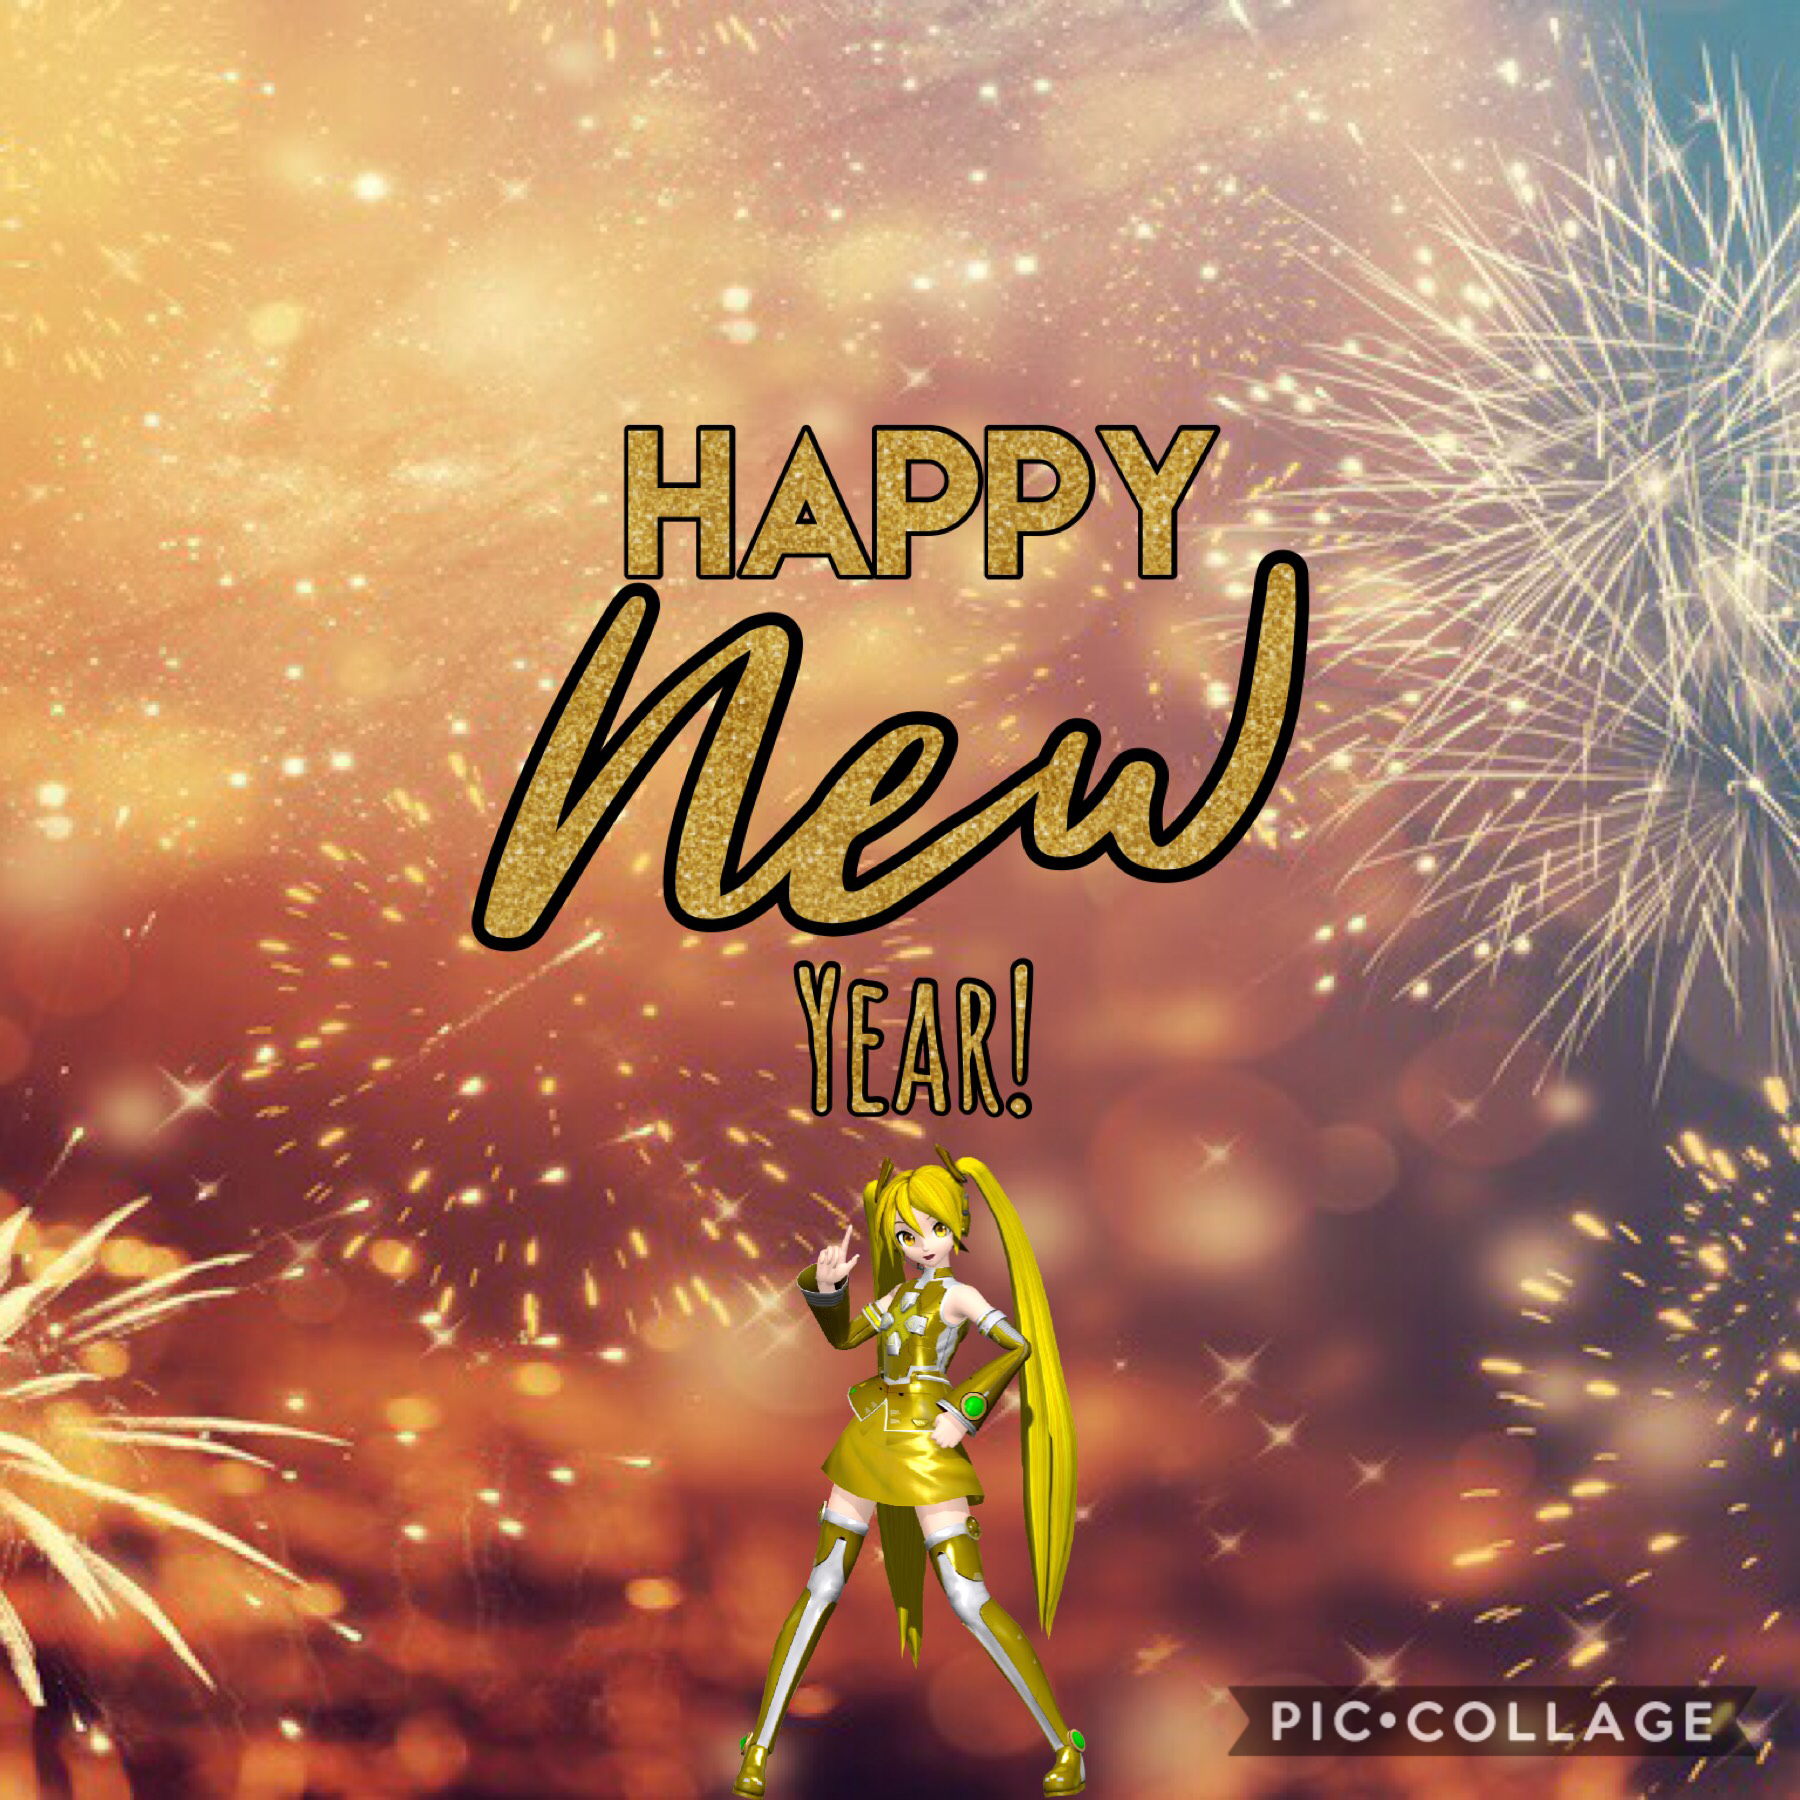 💛🎉⭐️🎇🎆I hope you have a wonderful and happy year, 2018 was amazing and I hope 2019 is even better🎆🎇⭐️🎉💛